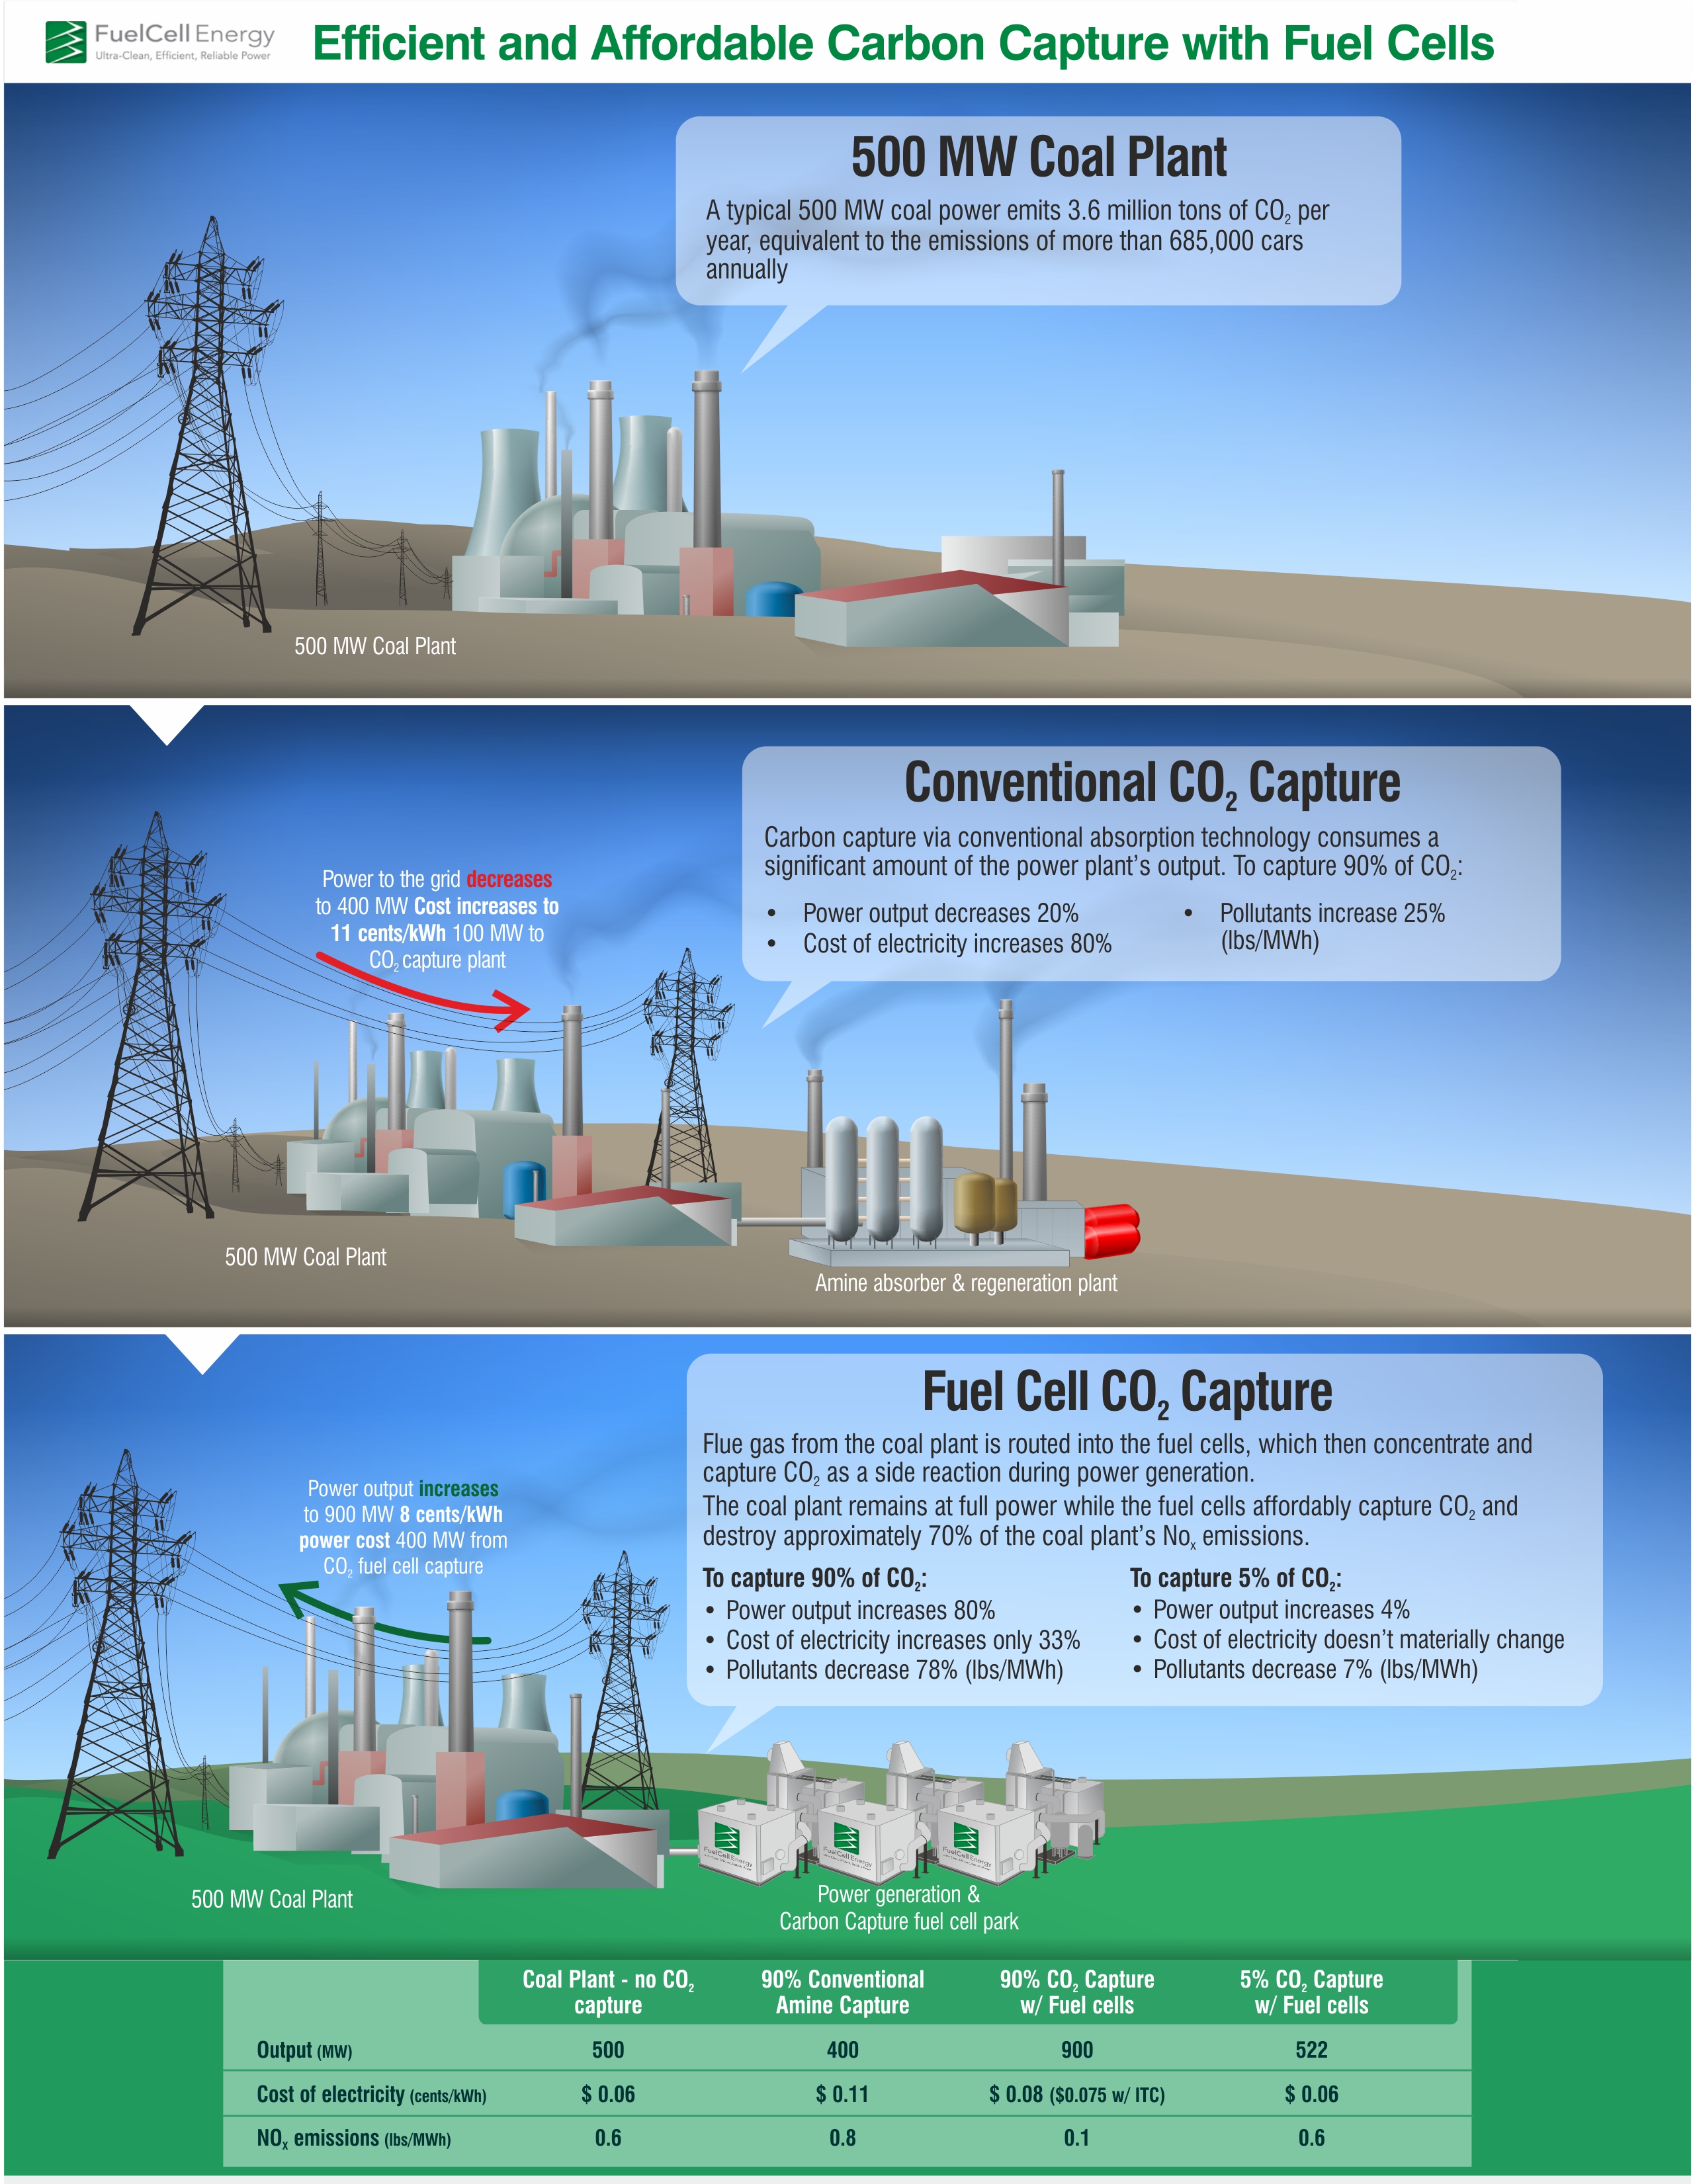 Efficient and Affordable Carbon Capture with Fuel Cells